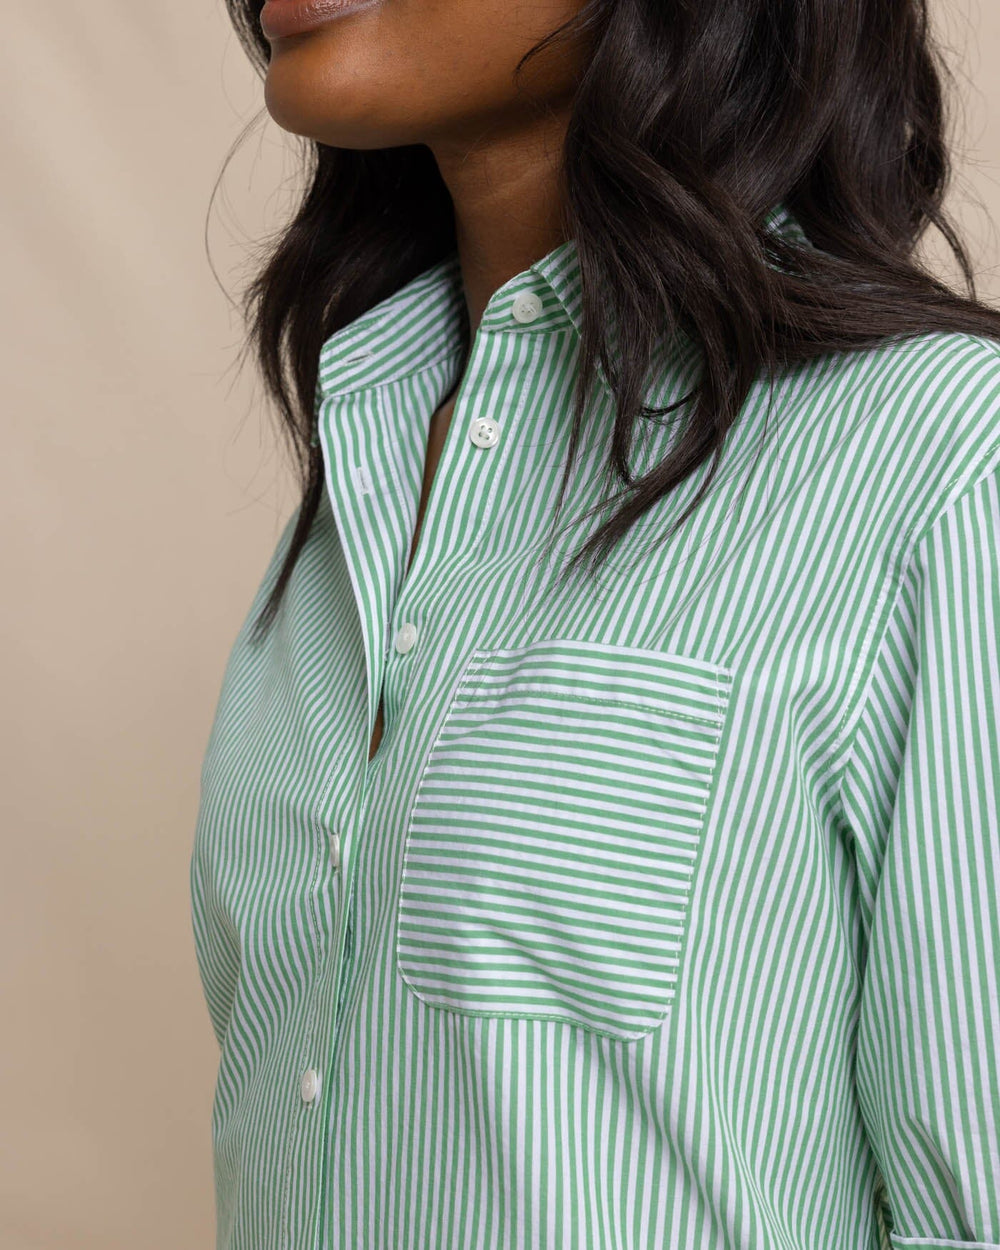 The detail view of the Southern Tide Cam Stripe Poplin Dress by Southern Tide - Lawn Green